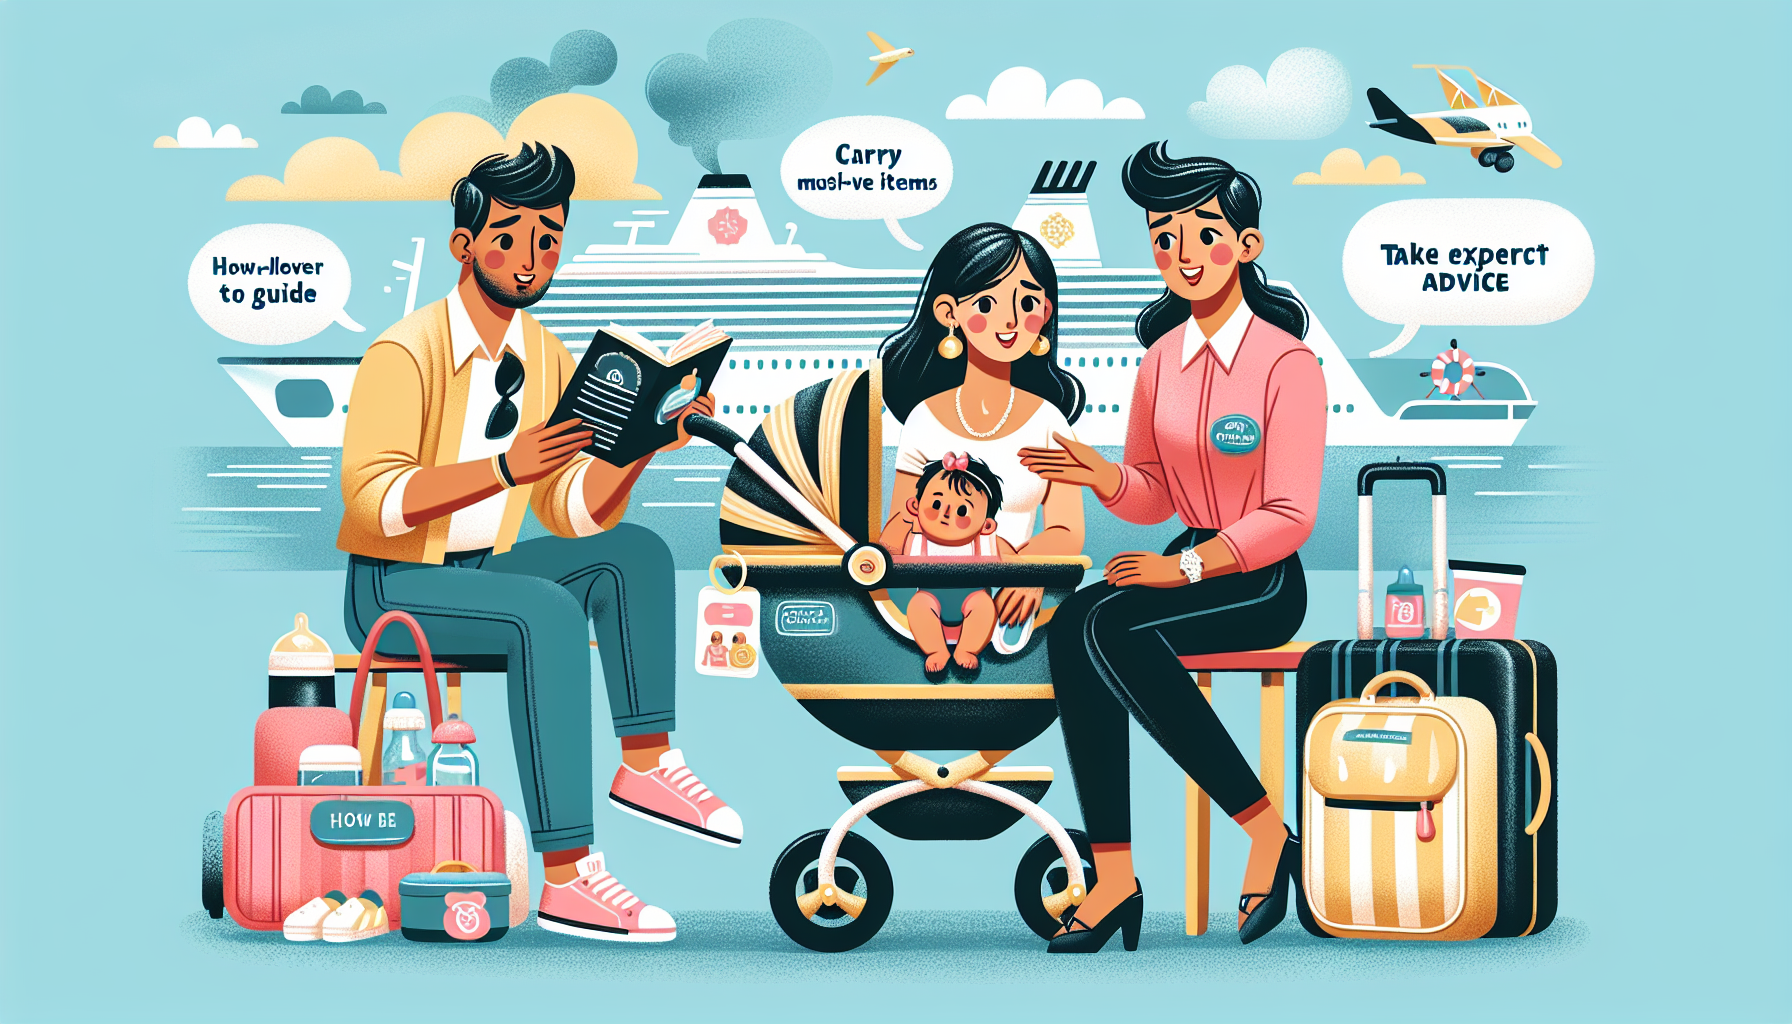 learn essential tips for traveling with babies on a cruise, from packing to safety precautions, to ensure a stress-free and enjoyable experience for the entire family.